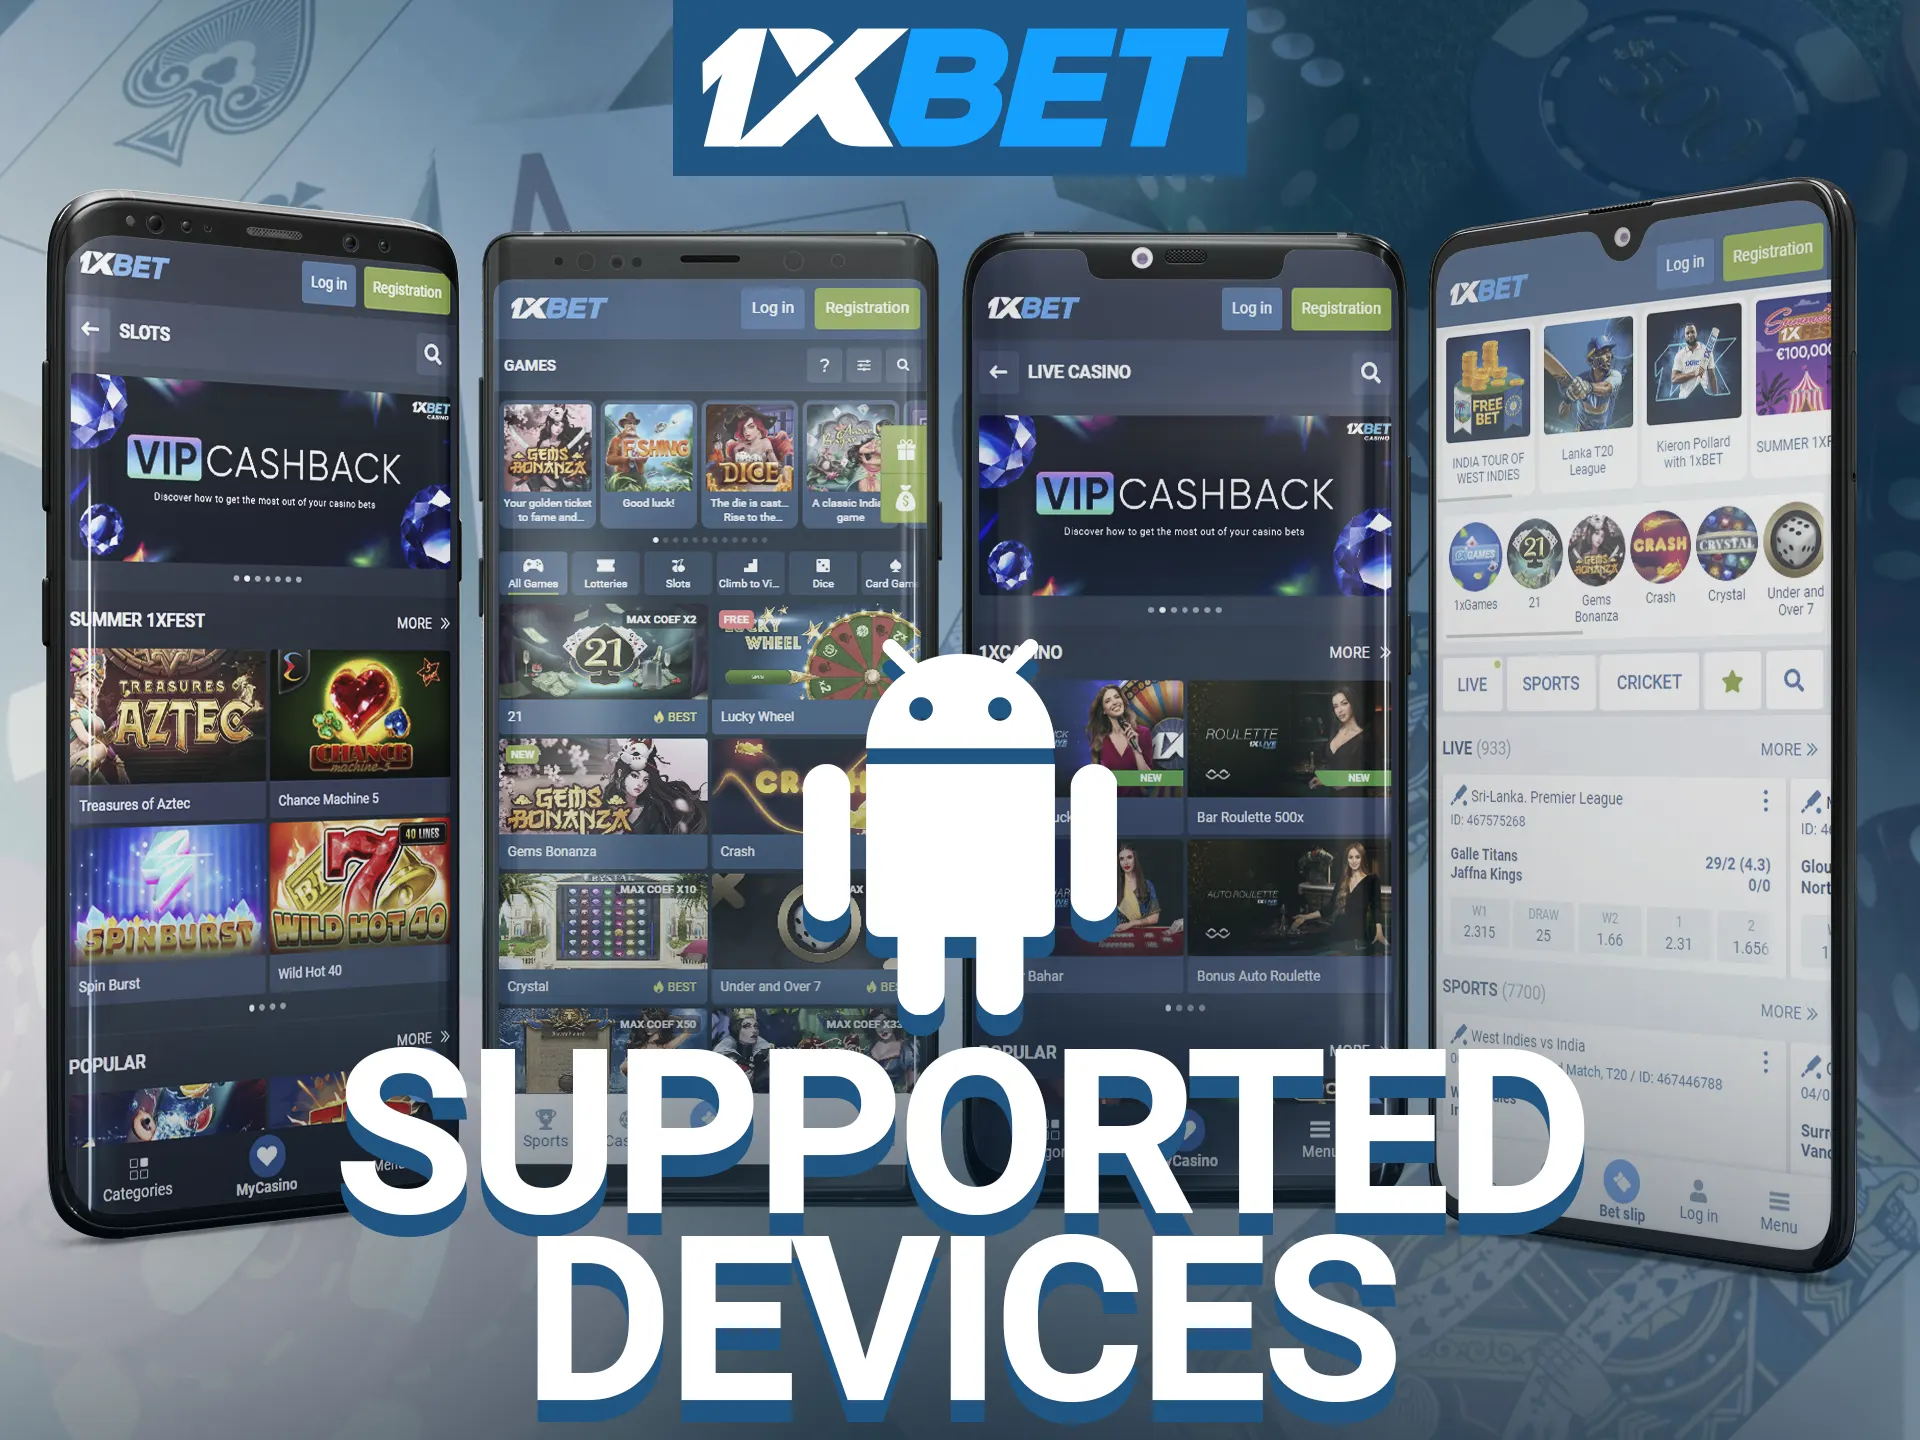 Download the 1xbet app on your Android mobile device.